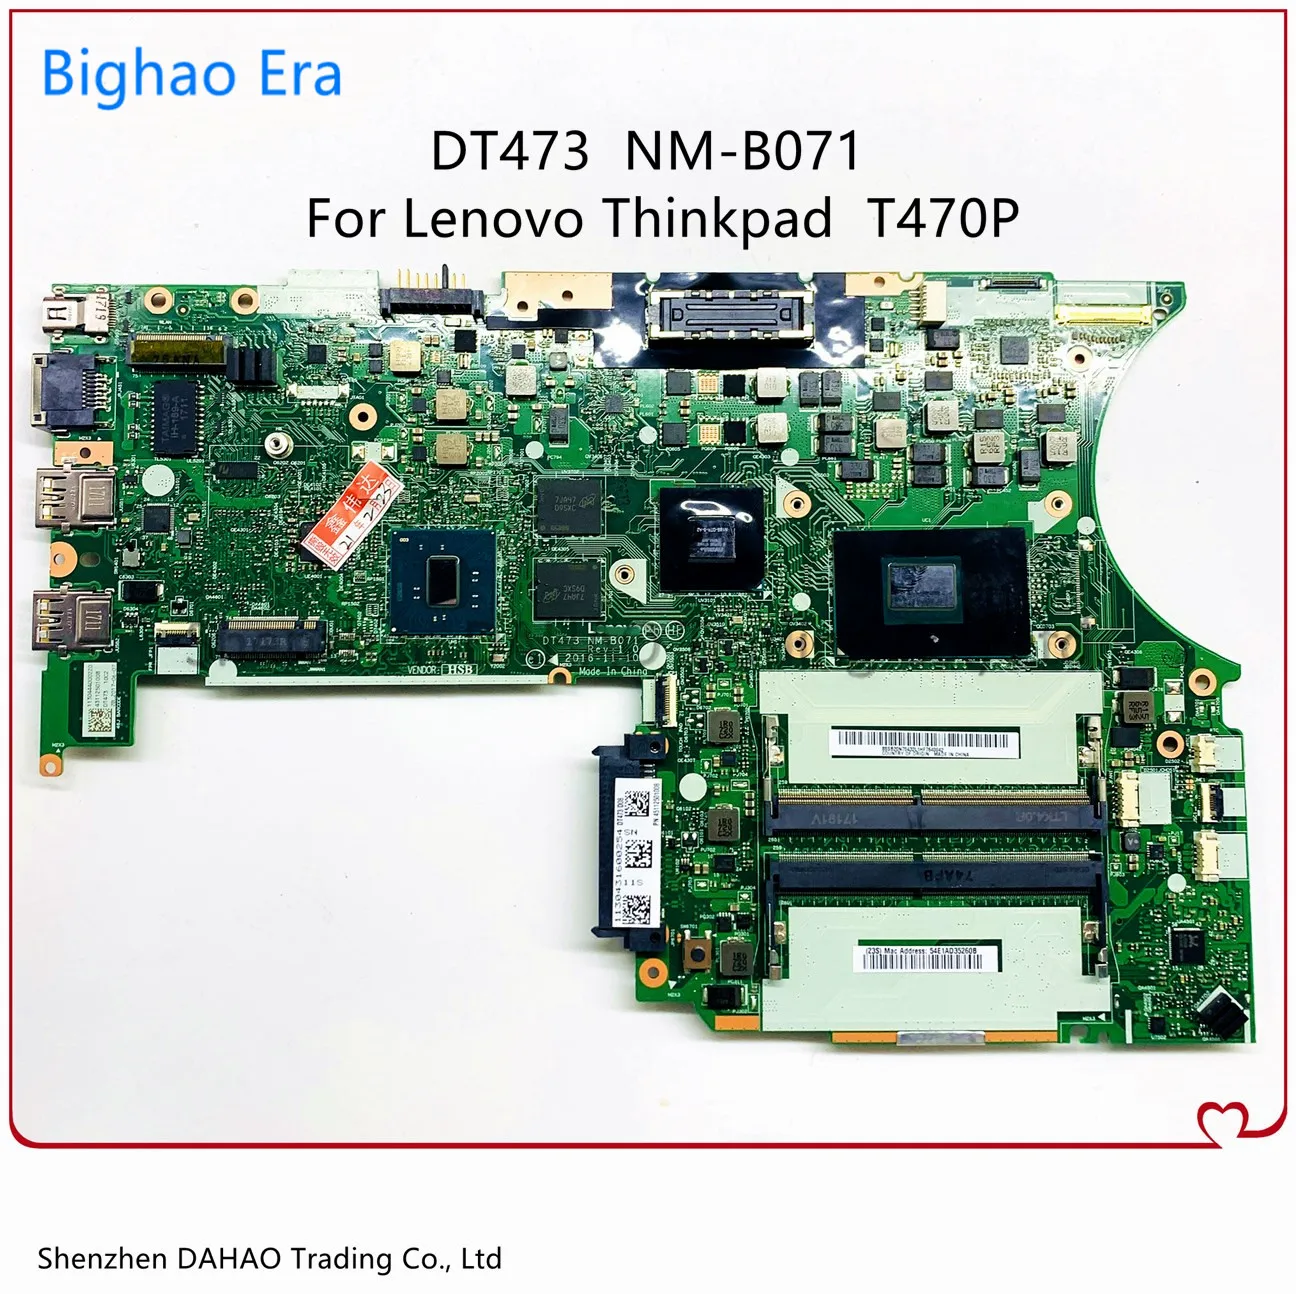 

For Lenovo Thinkpad T470P Laptop Motherboard DT473 NM-B071 With i7 7700HQ/7820HQ 940MX 2GB 100% Tested 01YR889 01YR887 01HW927